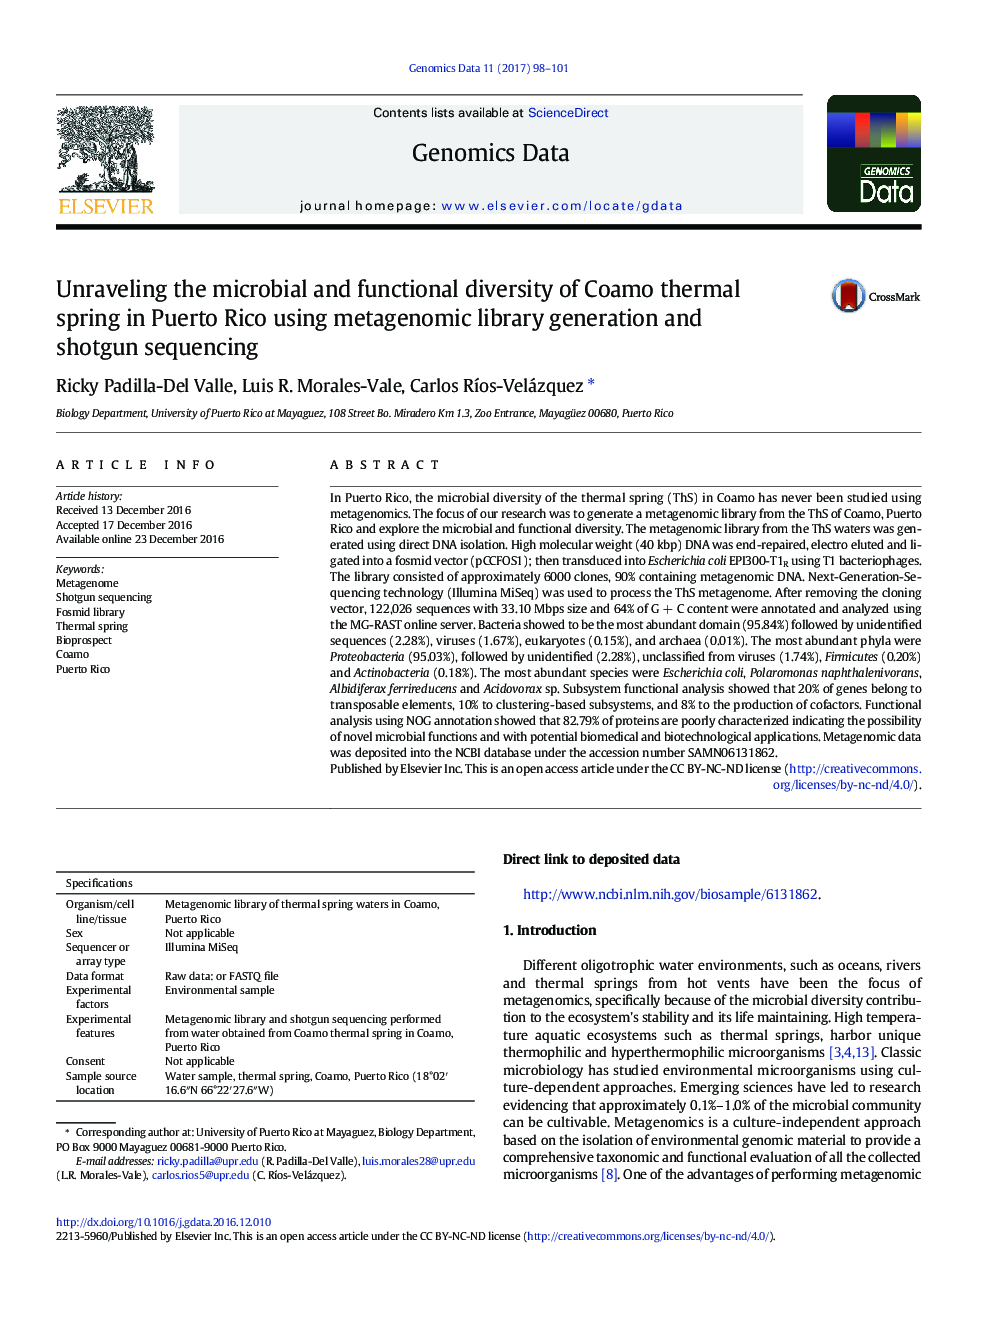 Unraveling the microbial and functional diversity of Coamo thermal spring in Puerto Rico using metagenomic library generation and shotgun sequencing